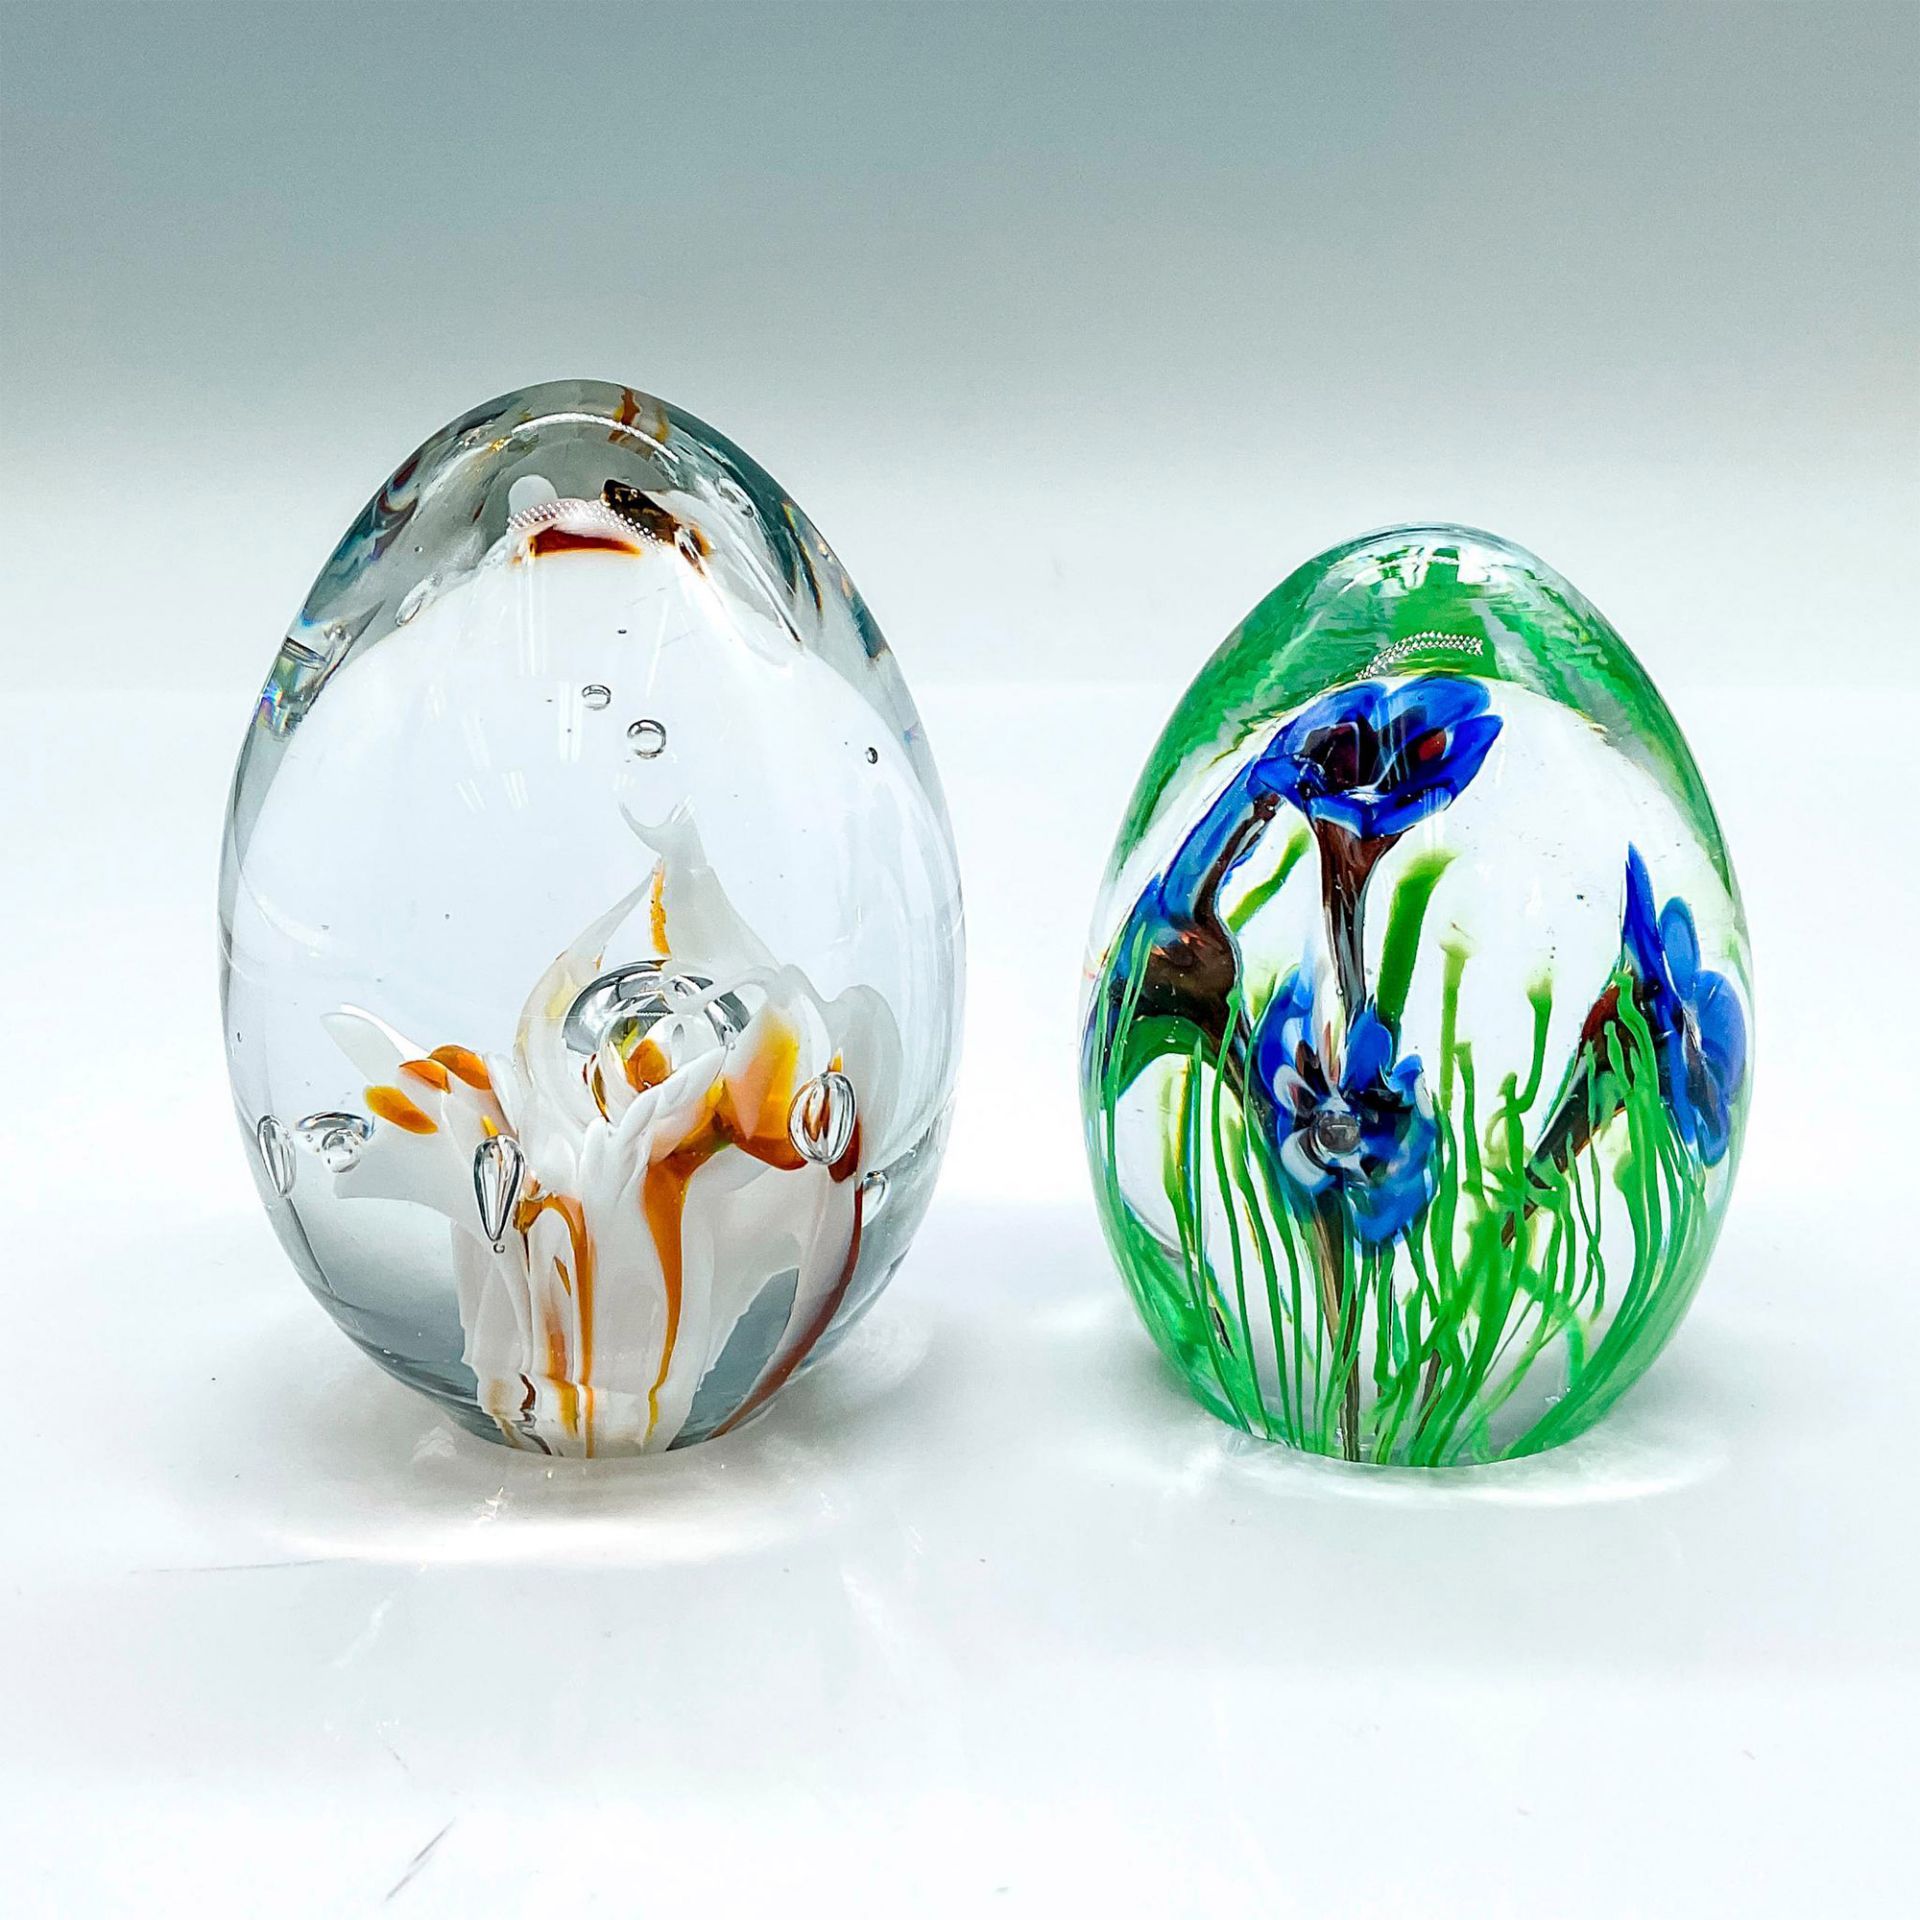 2pc Murano Art Glass Floral Paperweights